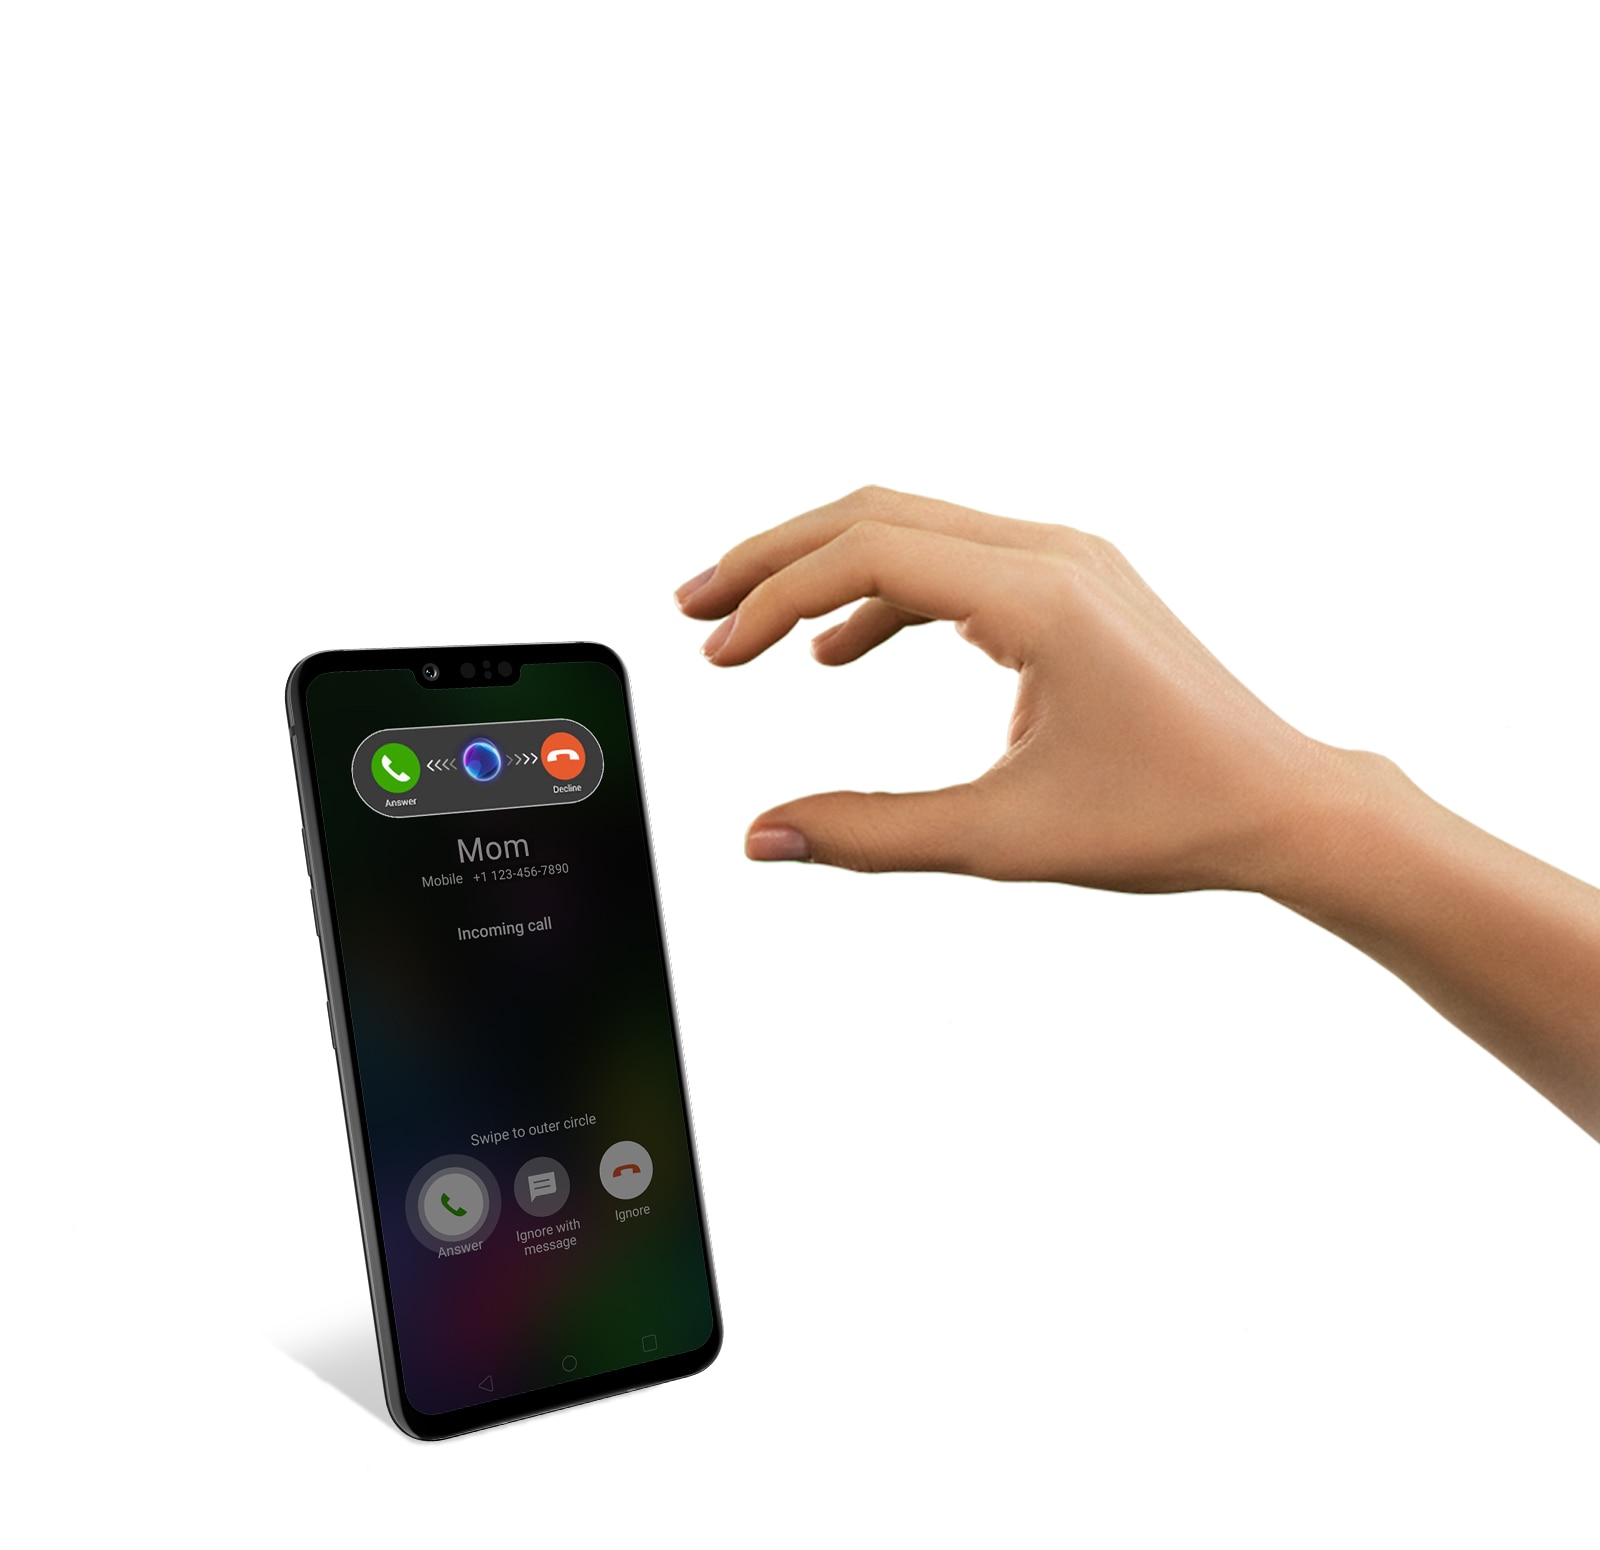 Give Touchless Commands1